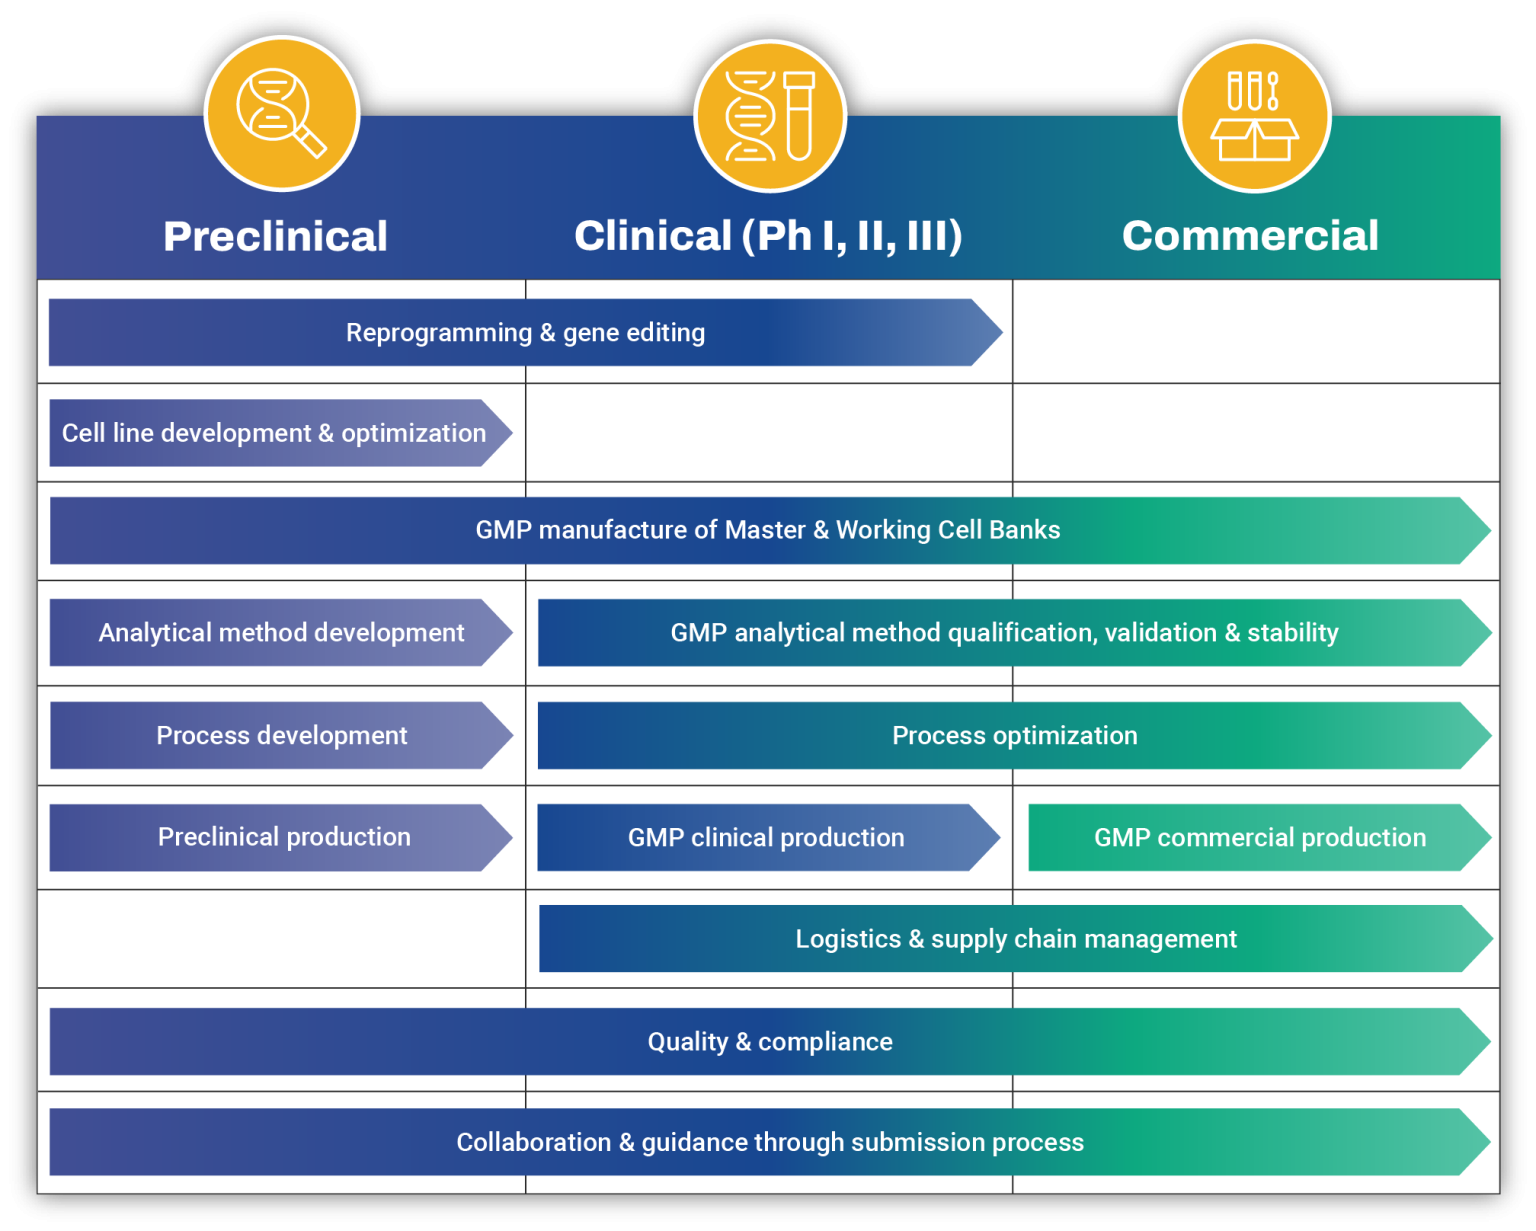 OmbiaBio Workflow Graphic: Preclinical, Clinical, Commercial